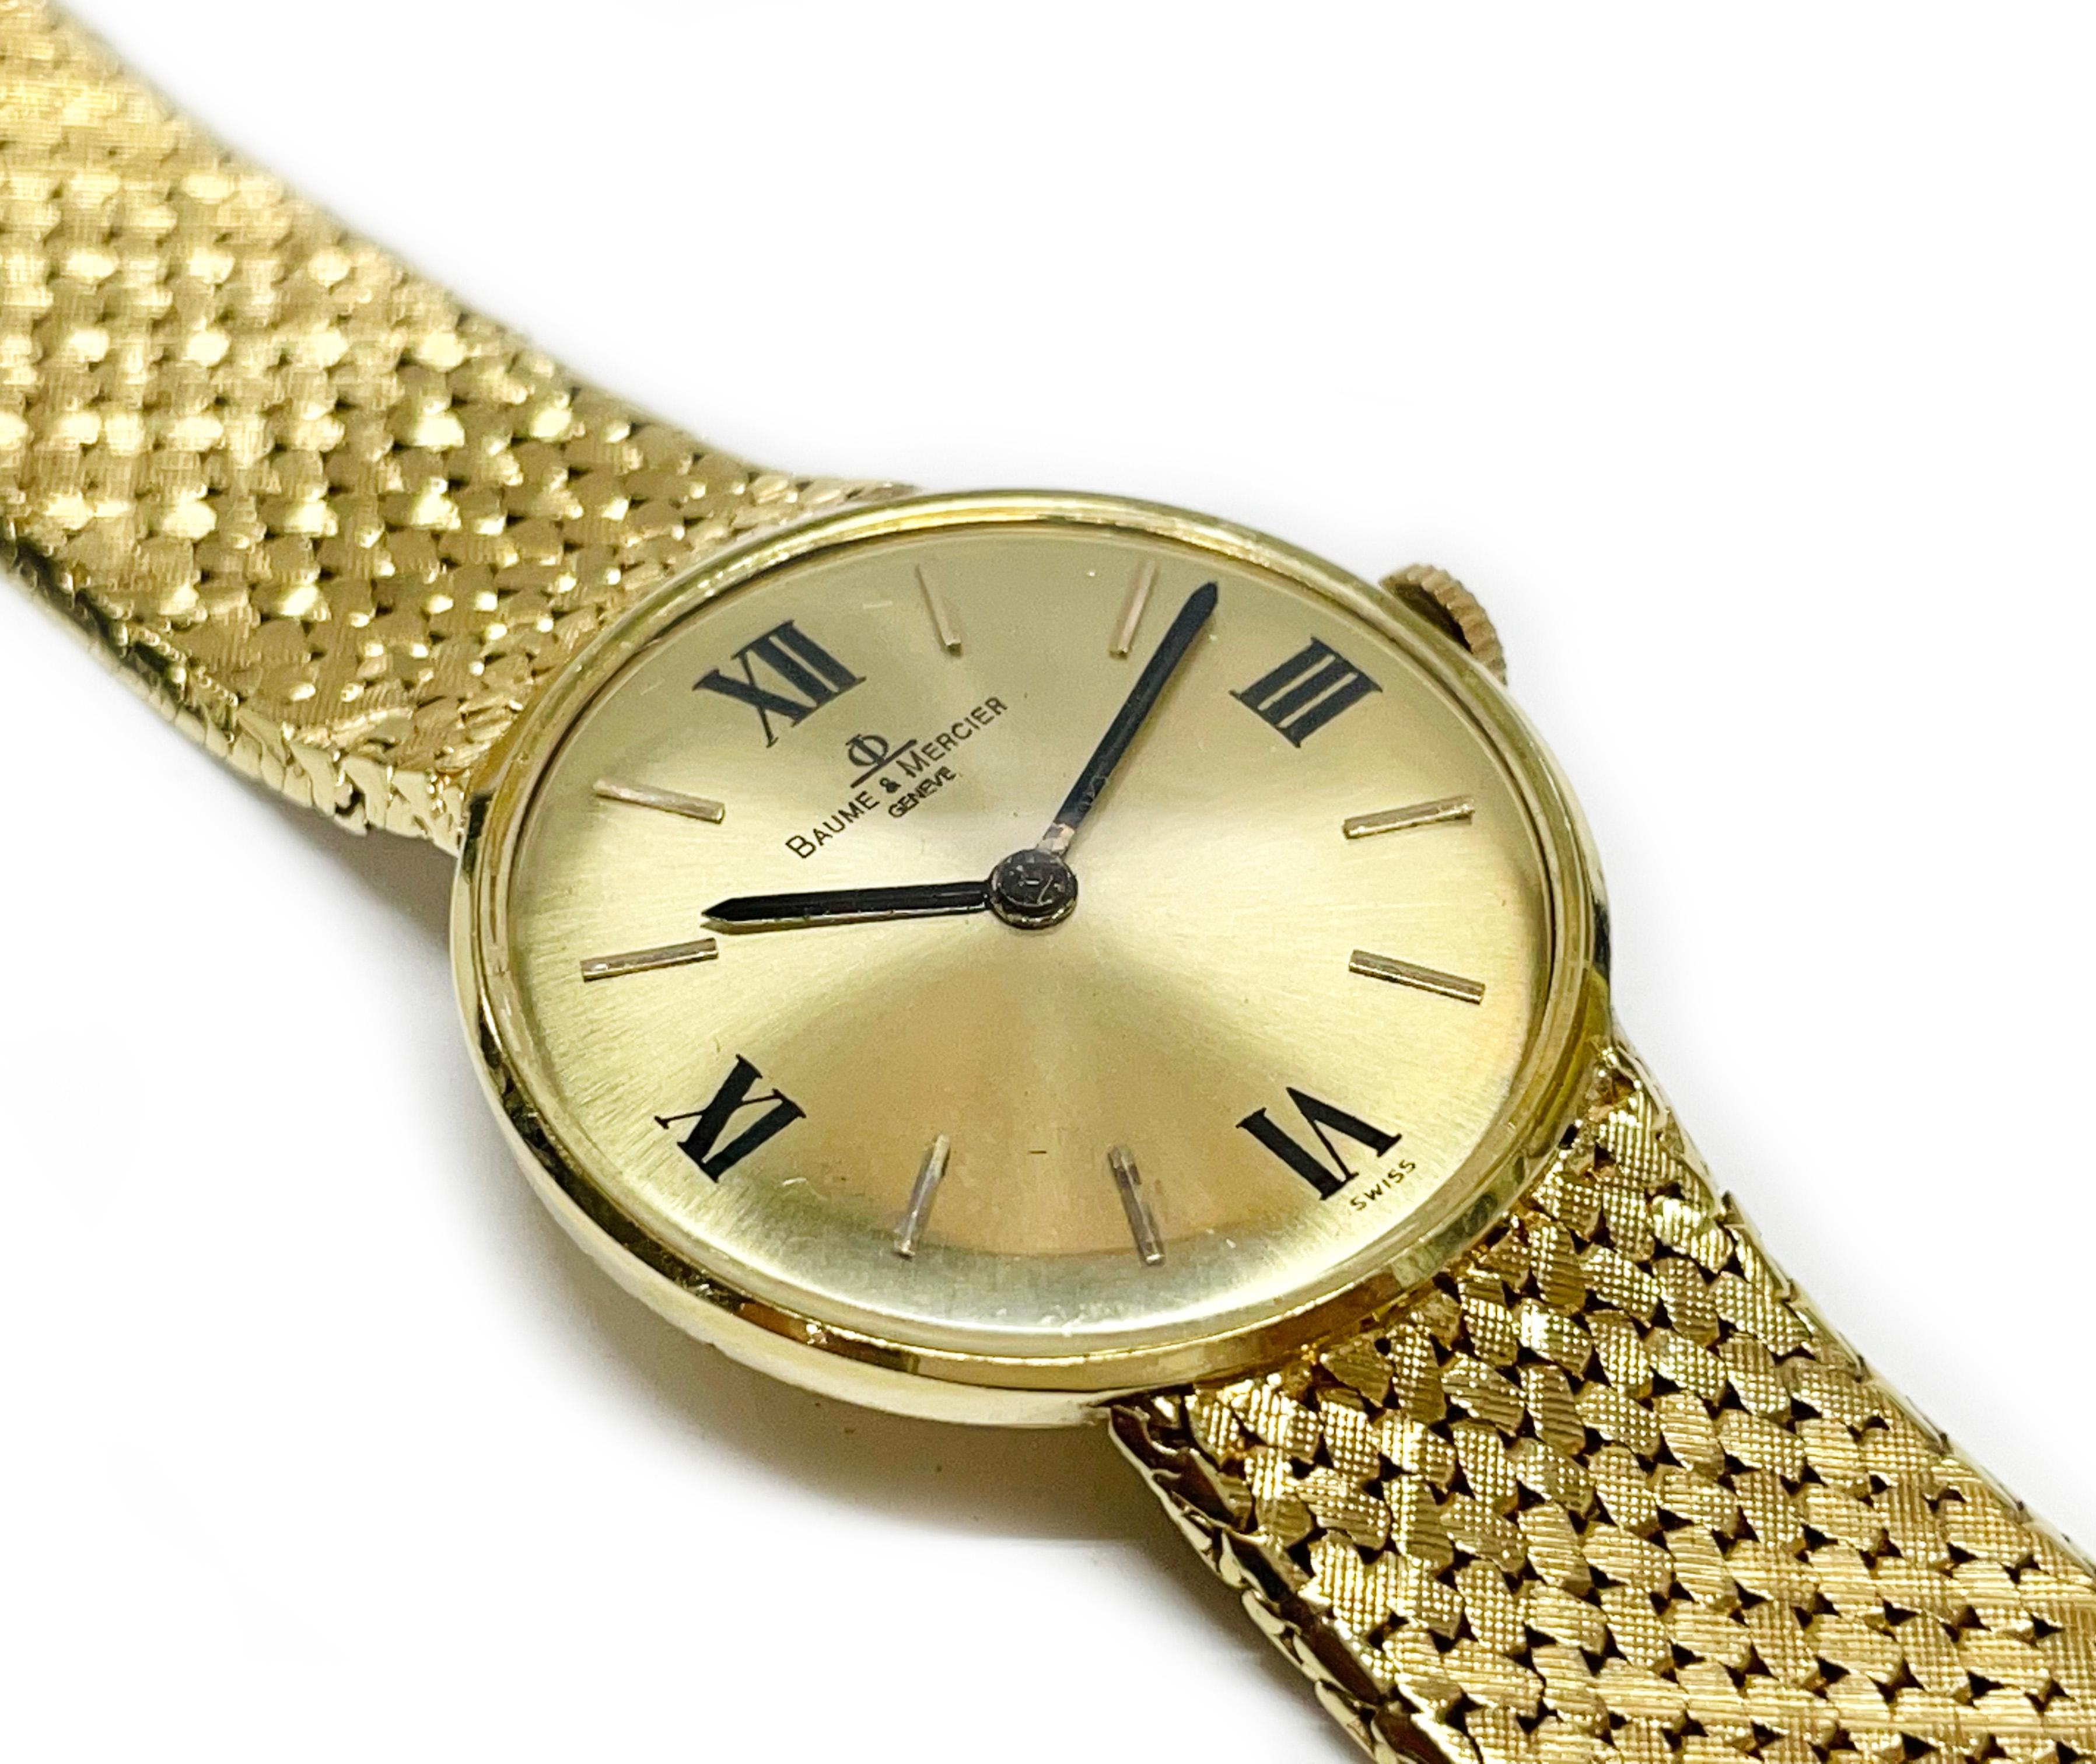 14 Karat Baume et Mercier Yellow Gold Wristwatch. The watch features a round gold dial, Roman numbers at twelve, three, six, and, nine. The watch has baton-style hour and minute hands. The bracelet band is mesh with a Florentine finish and measures